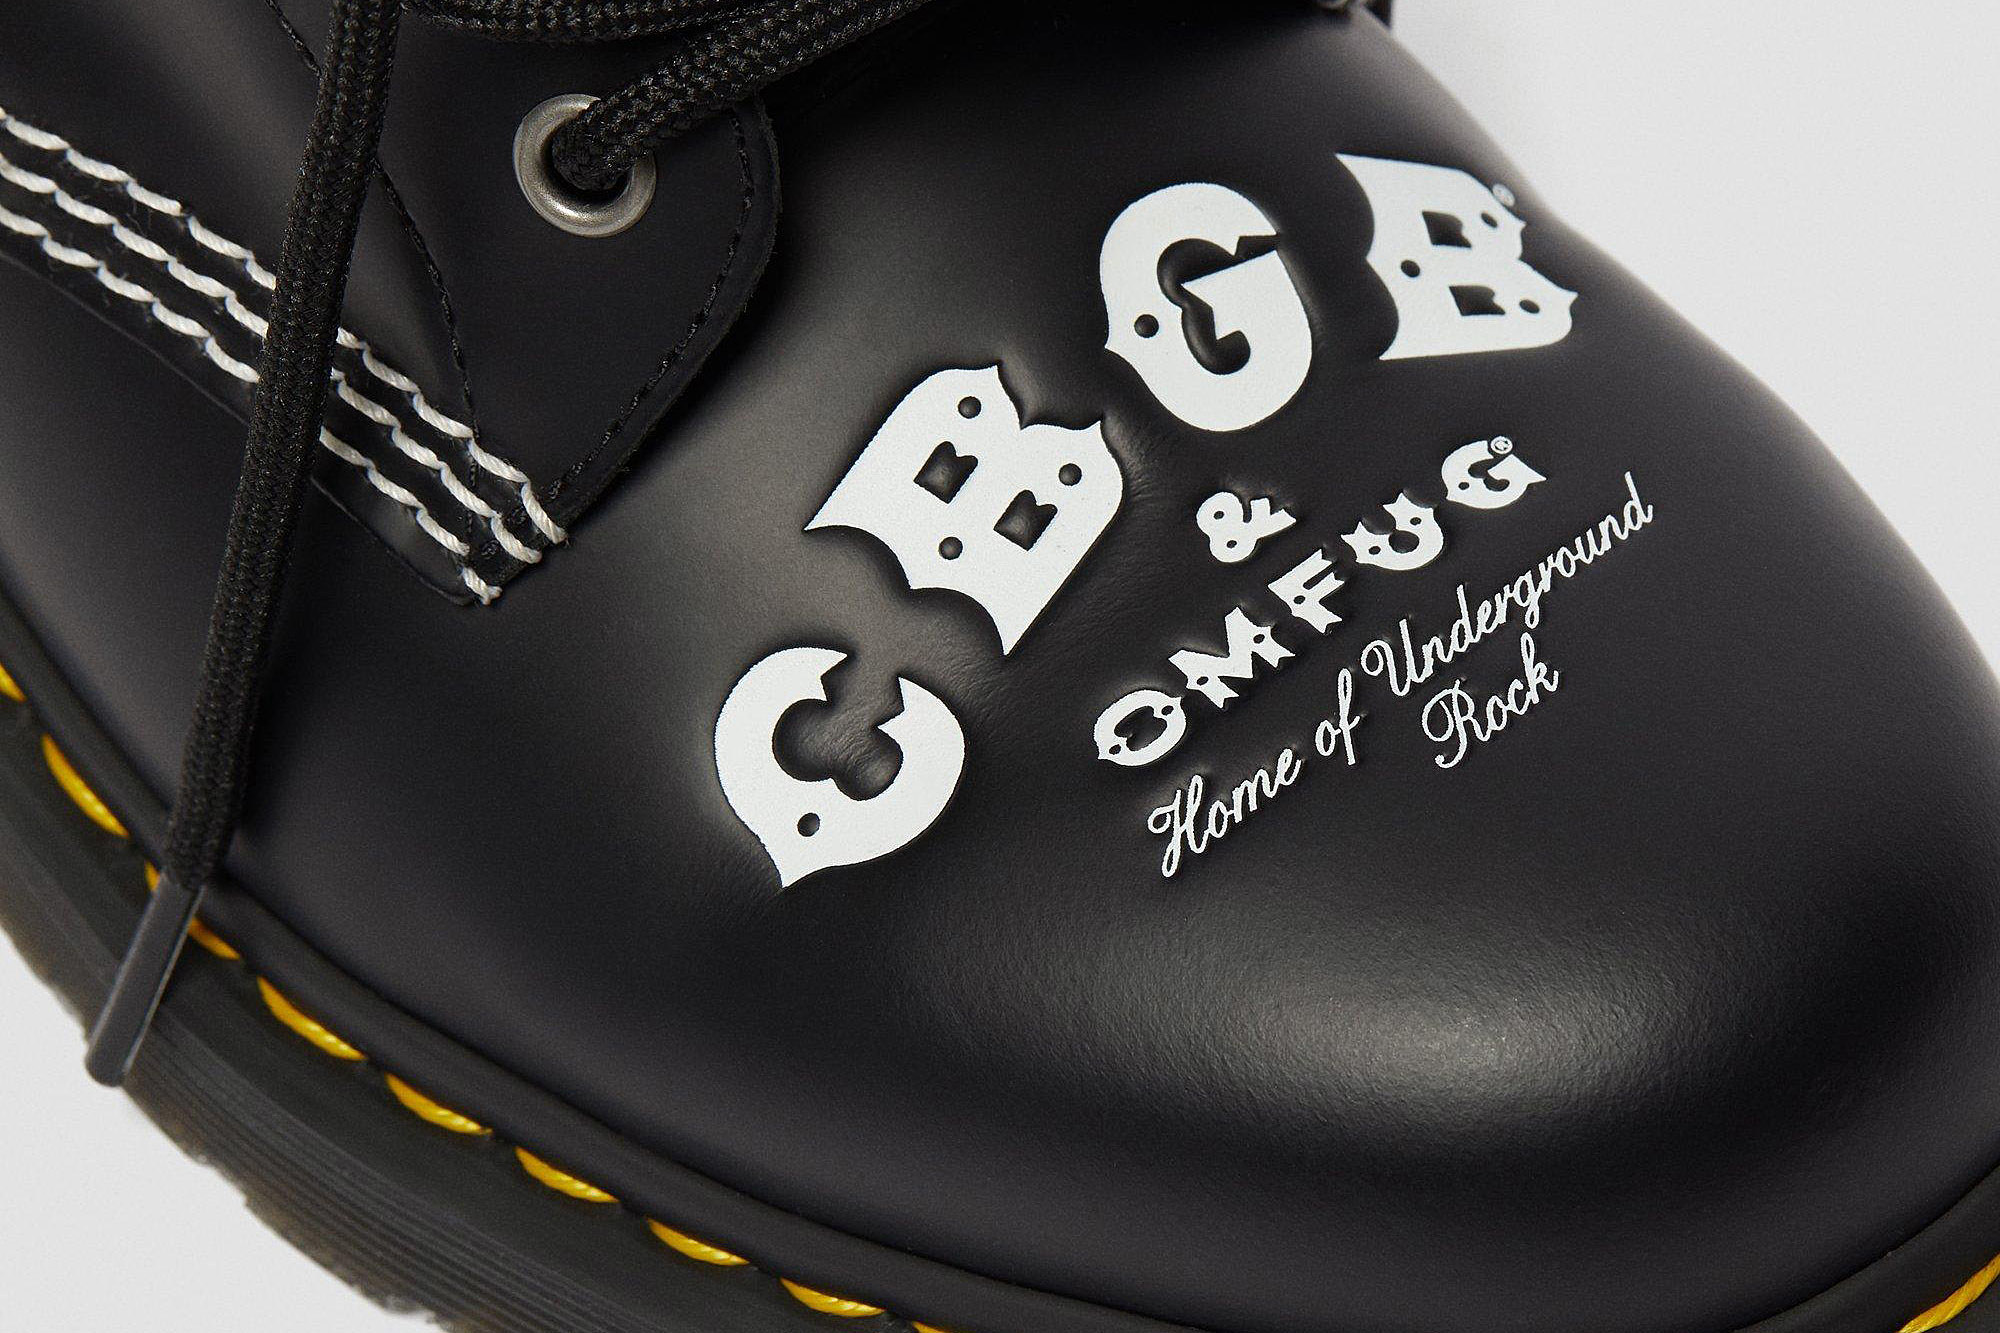 Dr. Marten made CBGB-themed boots